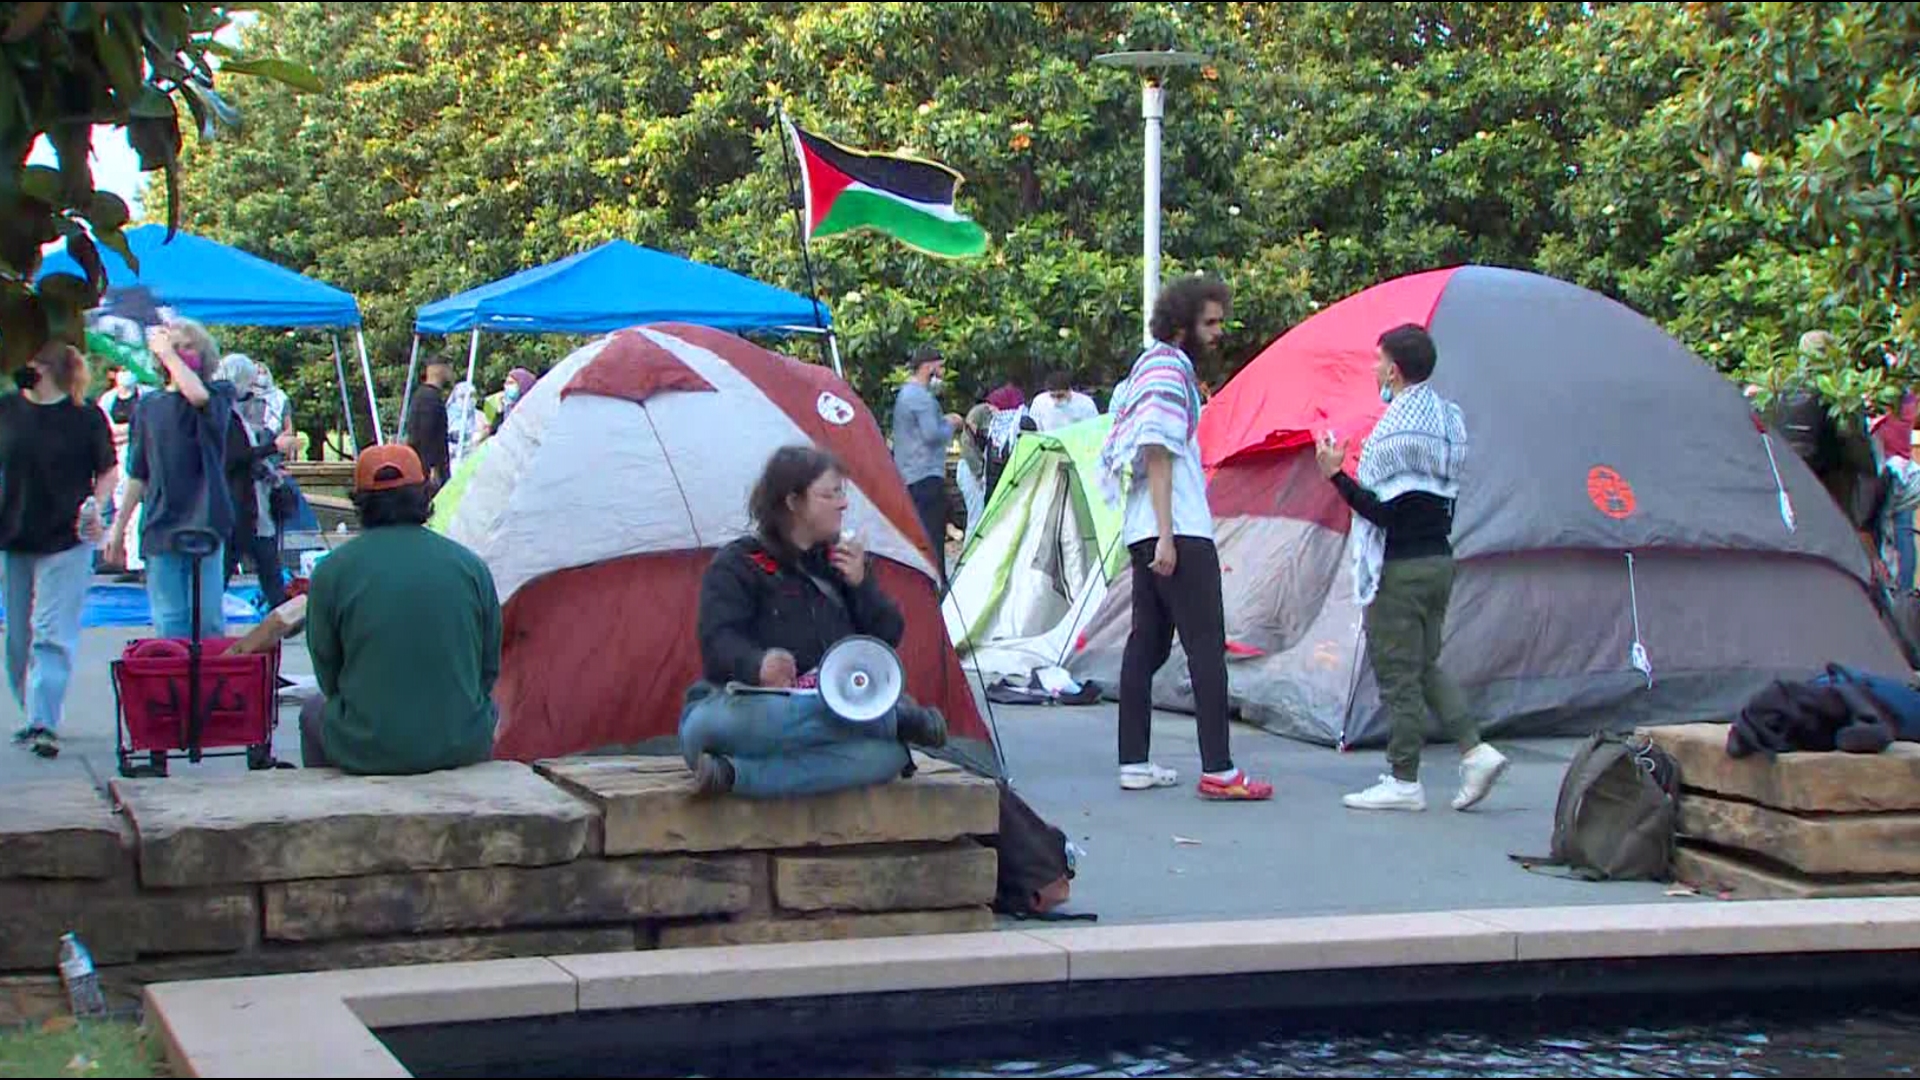 Students at UT Dallas staged an encampment Wednesday in support of Palestine. They are demanding the University to divest from companies with ties to Israel.